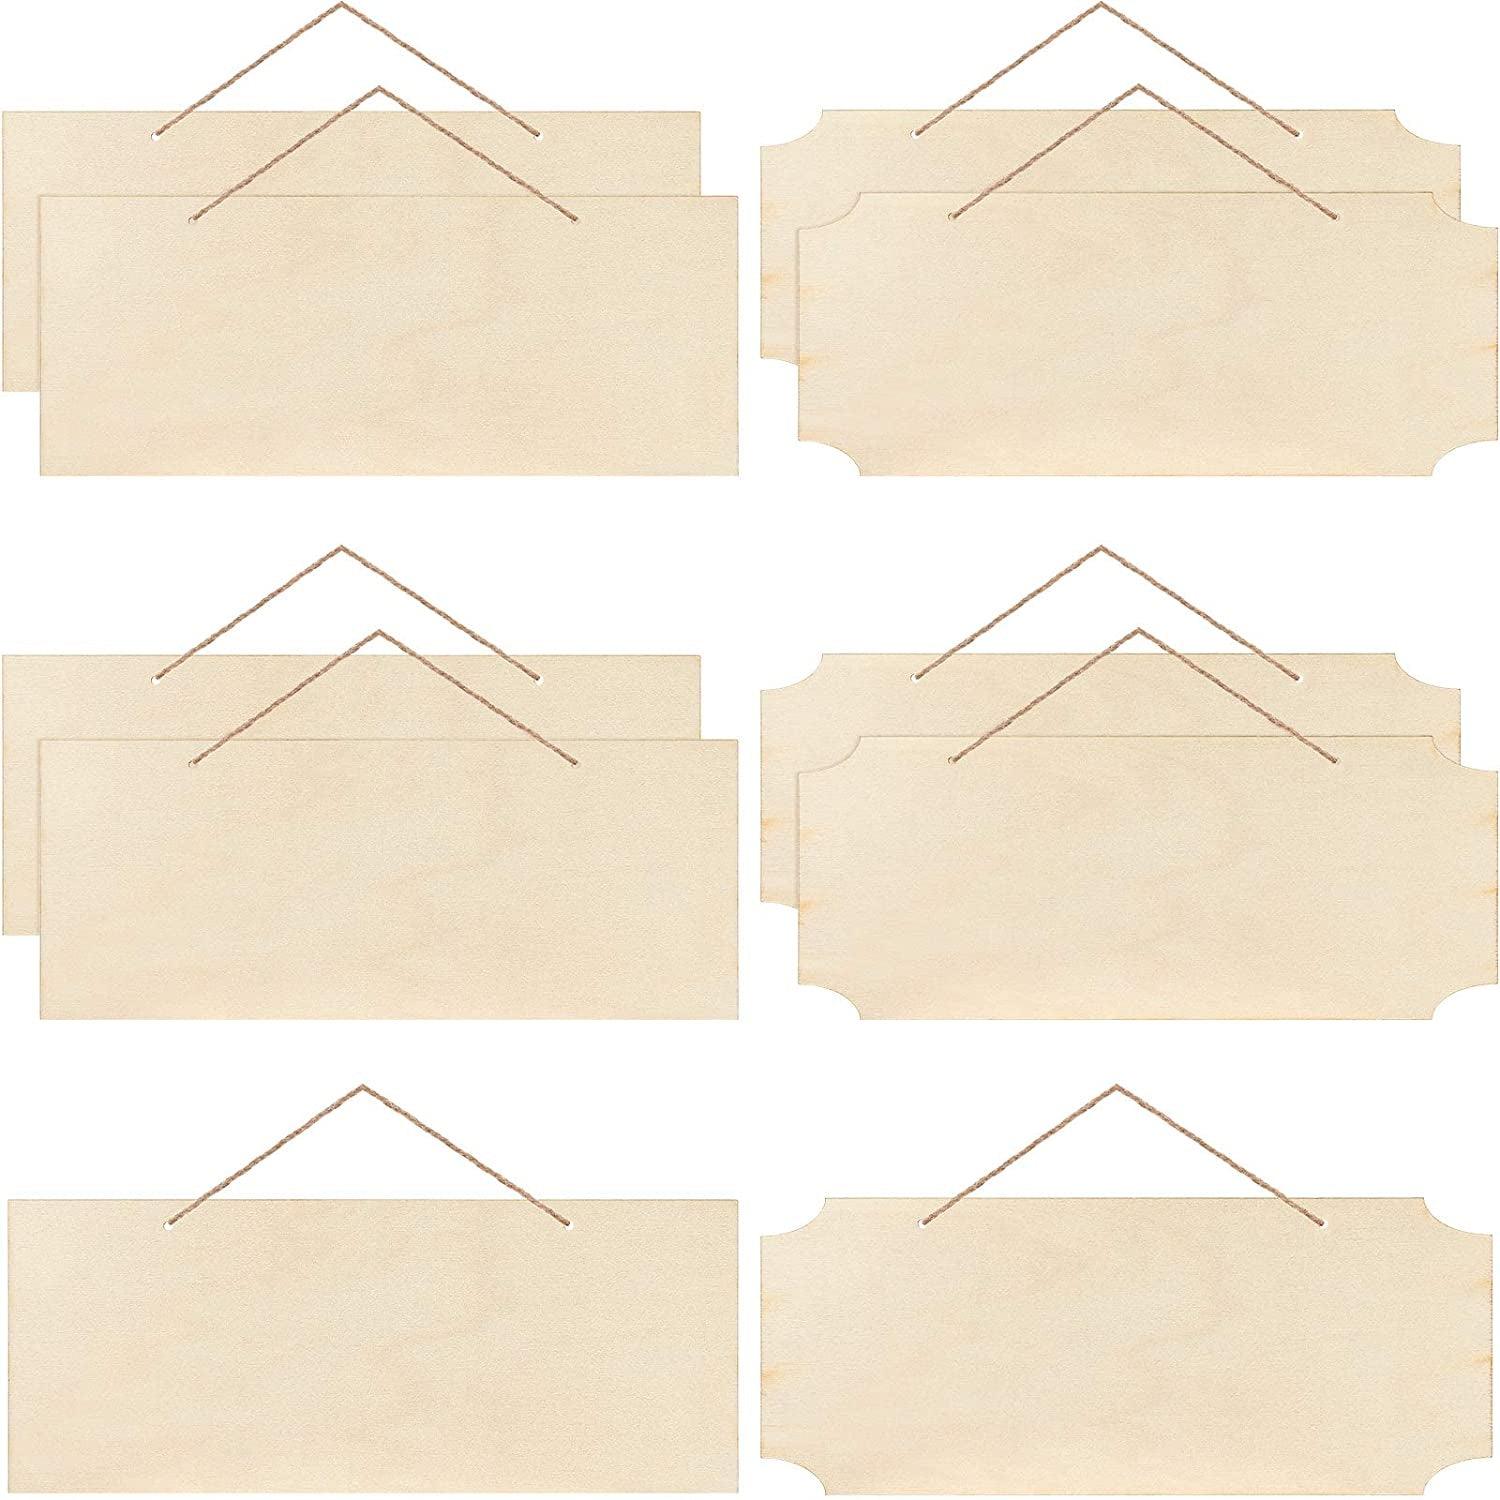 10 Pieces Unfinished Hanging Wood Sign Rectangle Blank Wooden Plaque Blank Hanging Slices Banners with Ropes (Beige) - WoodArtSupply